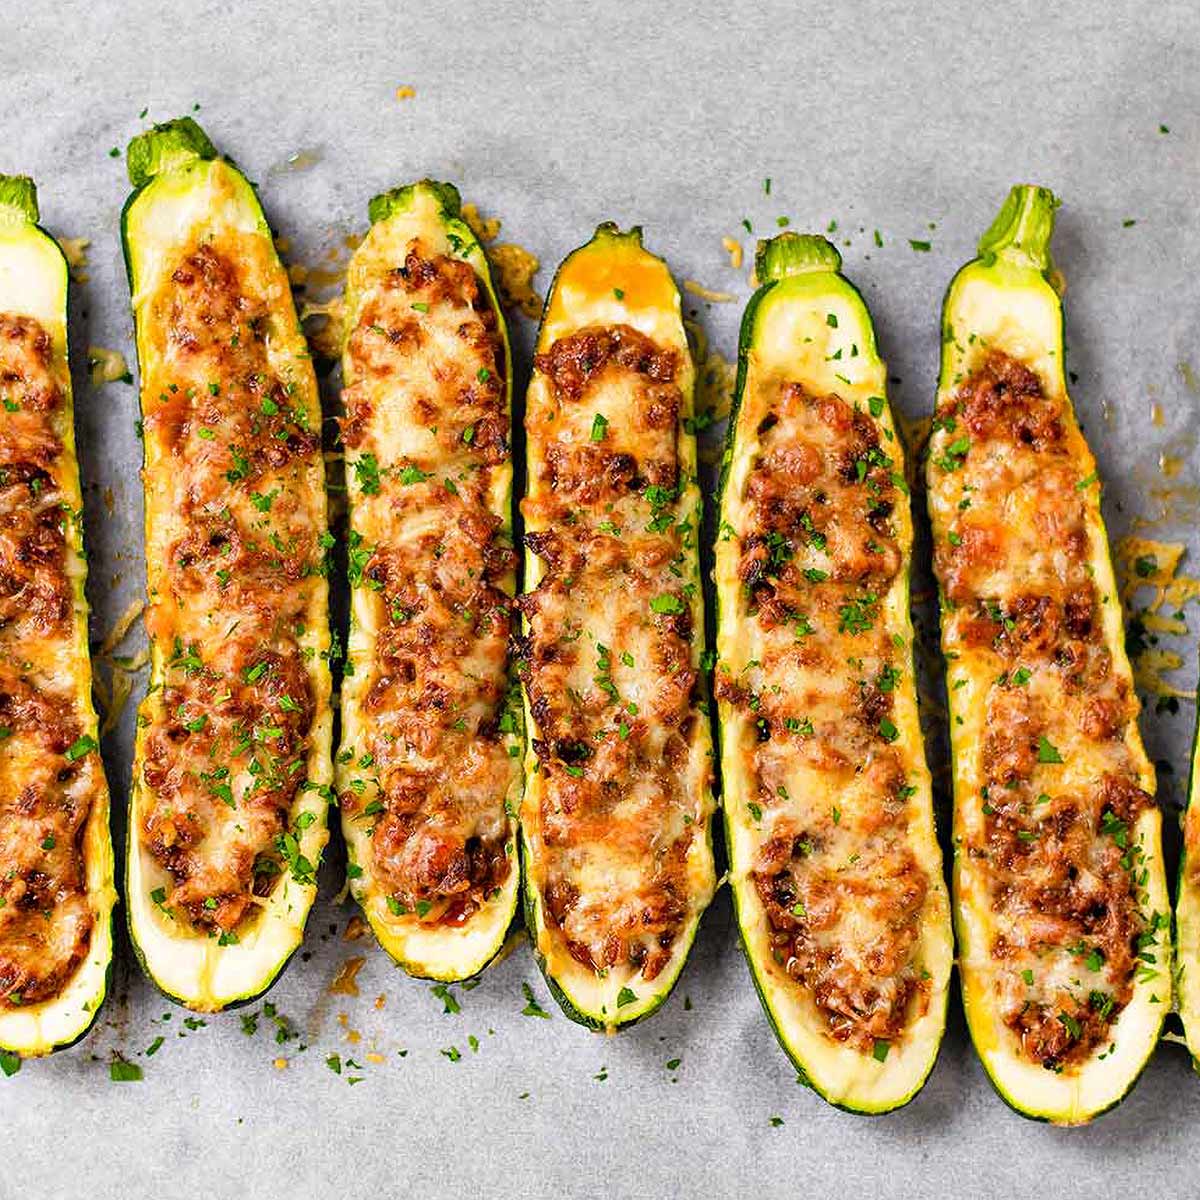 picture of 6 zucchini halves filled with ground beef on a grey background.